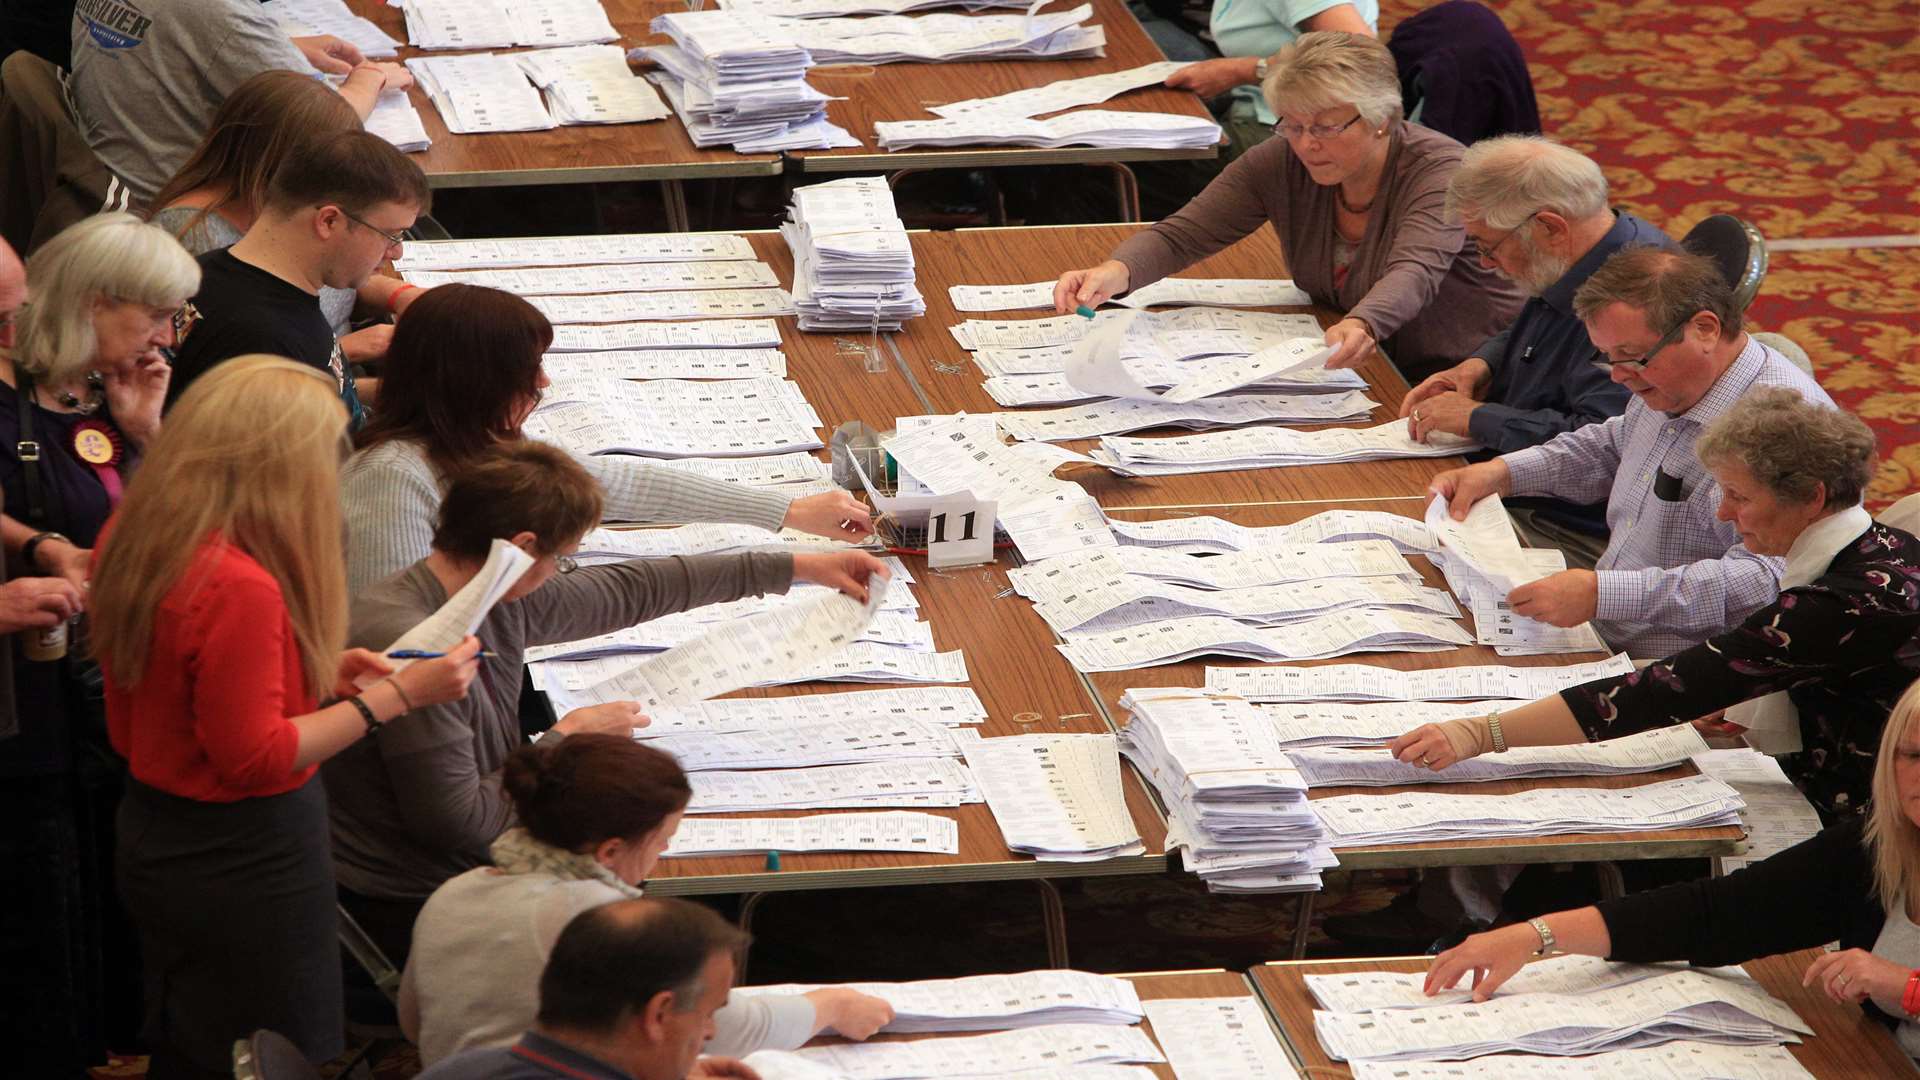 Votes being counted at an election. Picture: Jon Rowley/SWNS.com